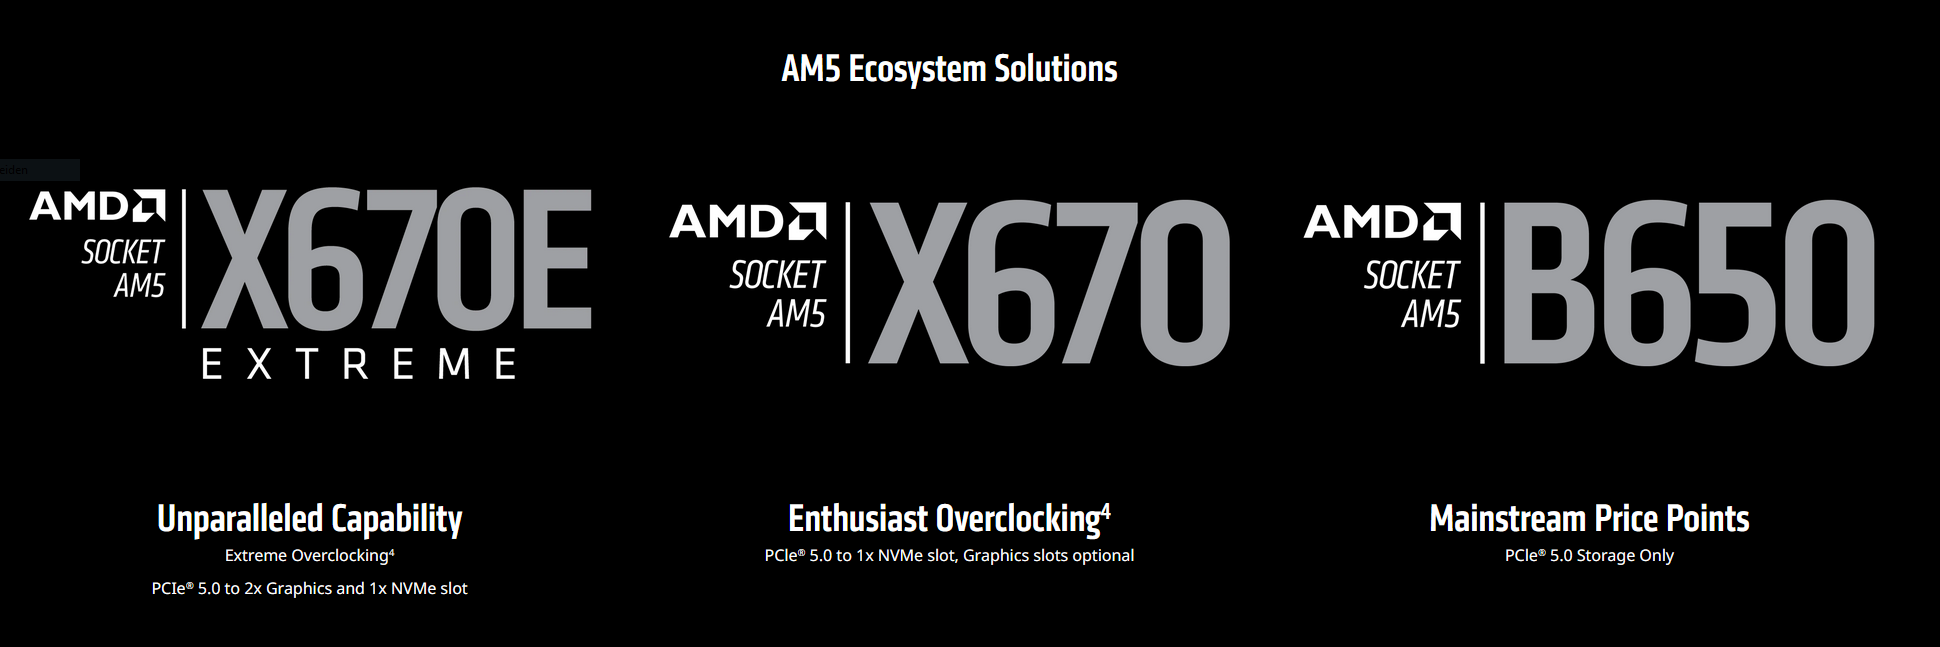 AMD-Webseite.PNG